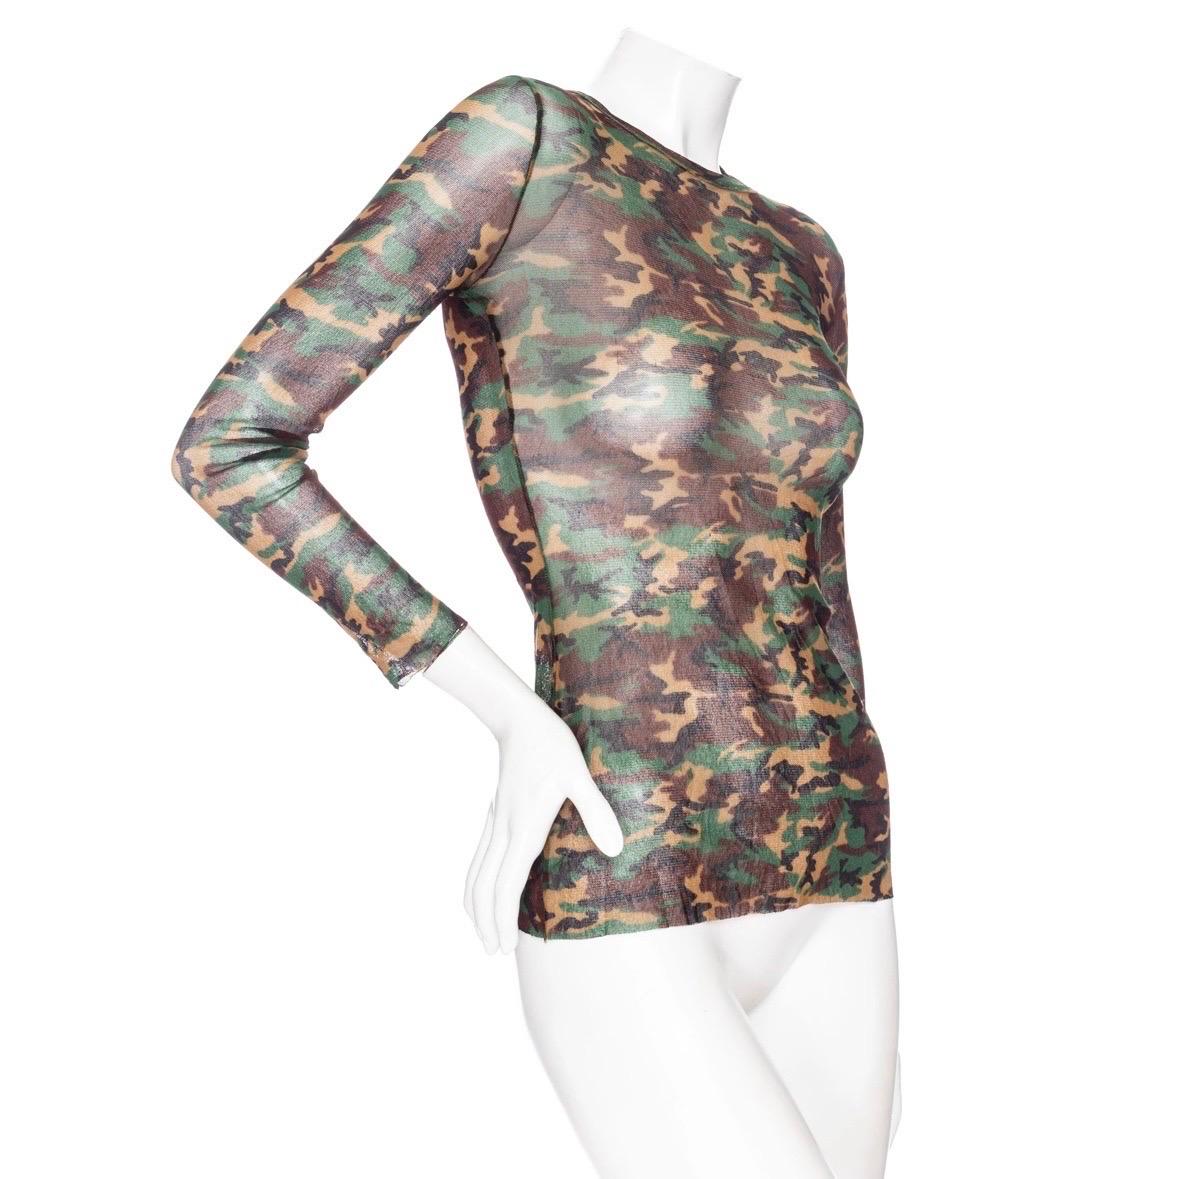 Jean Paul Gaultier Vintage Classique Green Camo Print Mesh Long Sleeve Top 

Vintage; circa 2000s
Brown/Tan/Green
Camo print
Long sleeve
Round neckline
Semi sheer
Stretch fit
Made in Italy
100% nylon
Excellent preowned vintage condition with little